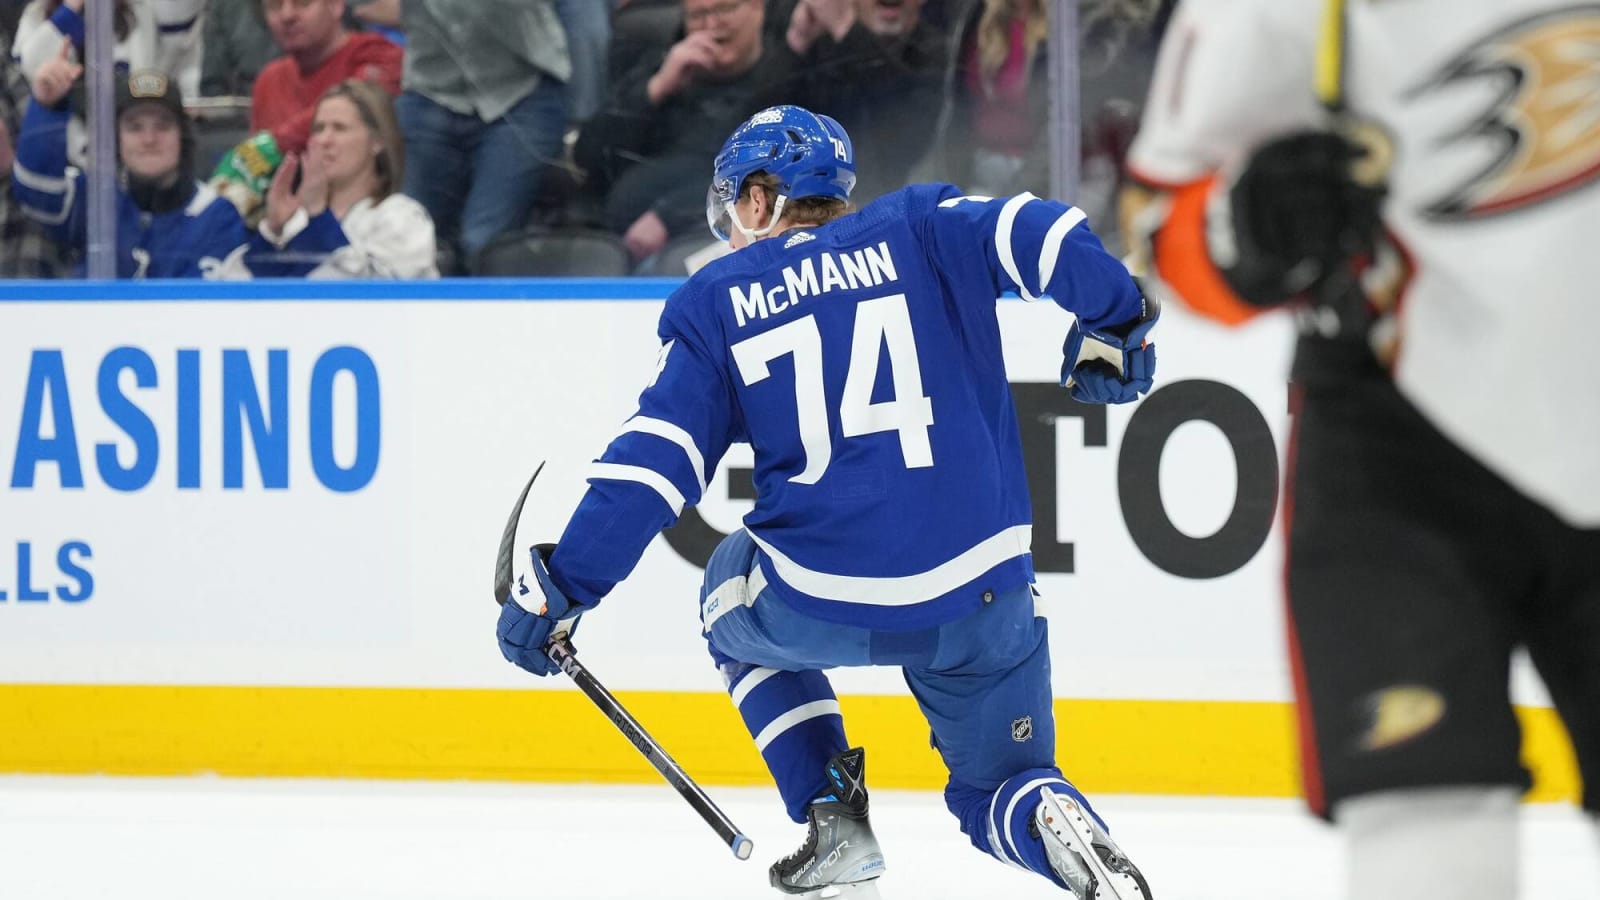 Maple Leafs sign Bobby McMann to two-year, $1.35 million AAV extension